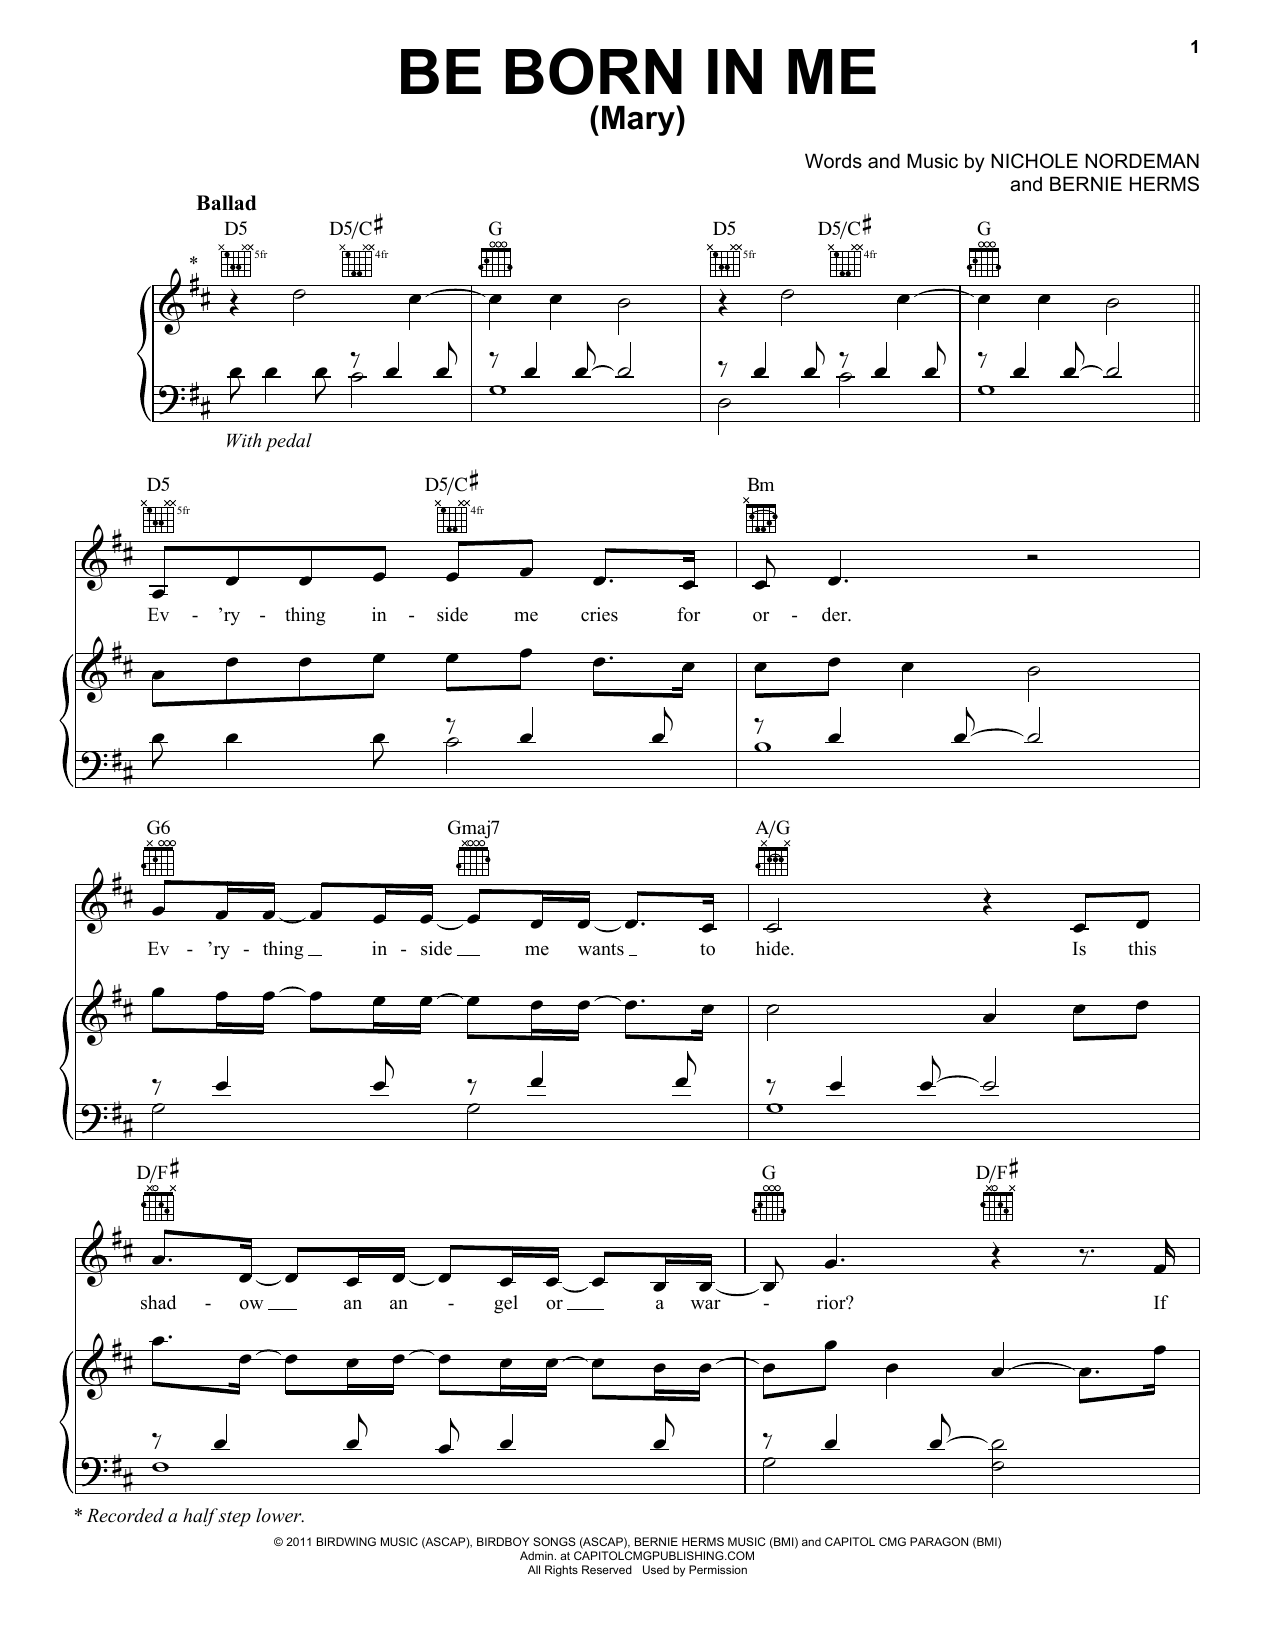 Download Francesca Battistelli Be Born In Me (Mary) Sheet Music